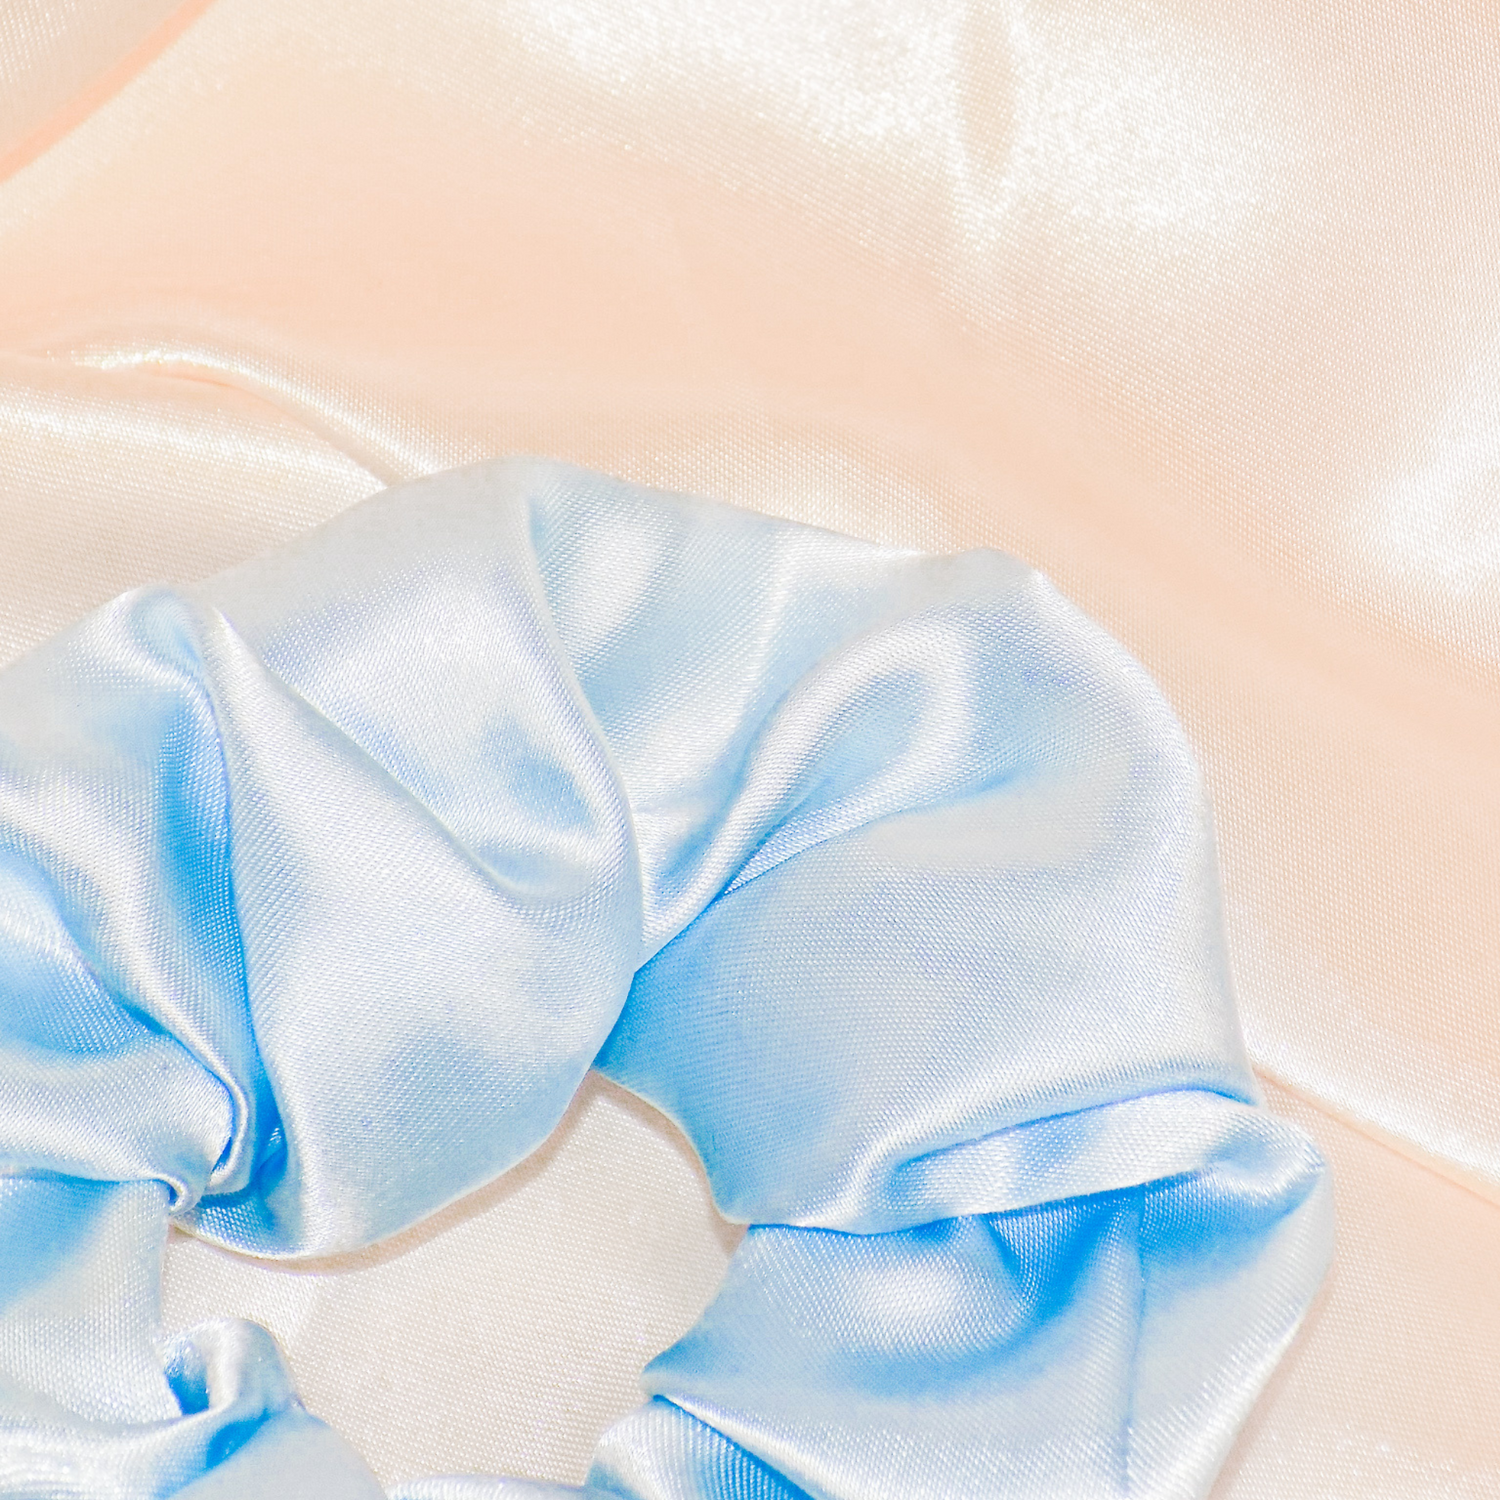 Light sky blue Satin Scrunchies in a glass bowl. The bowl is placed on Satin Silk materials.